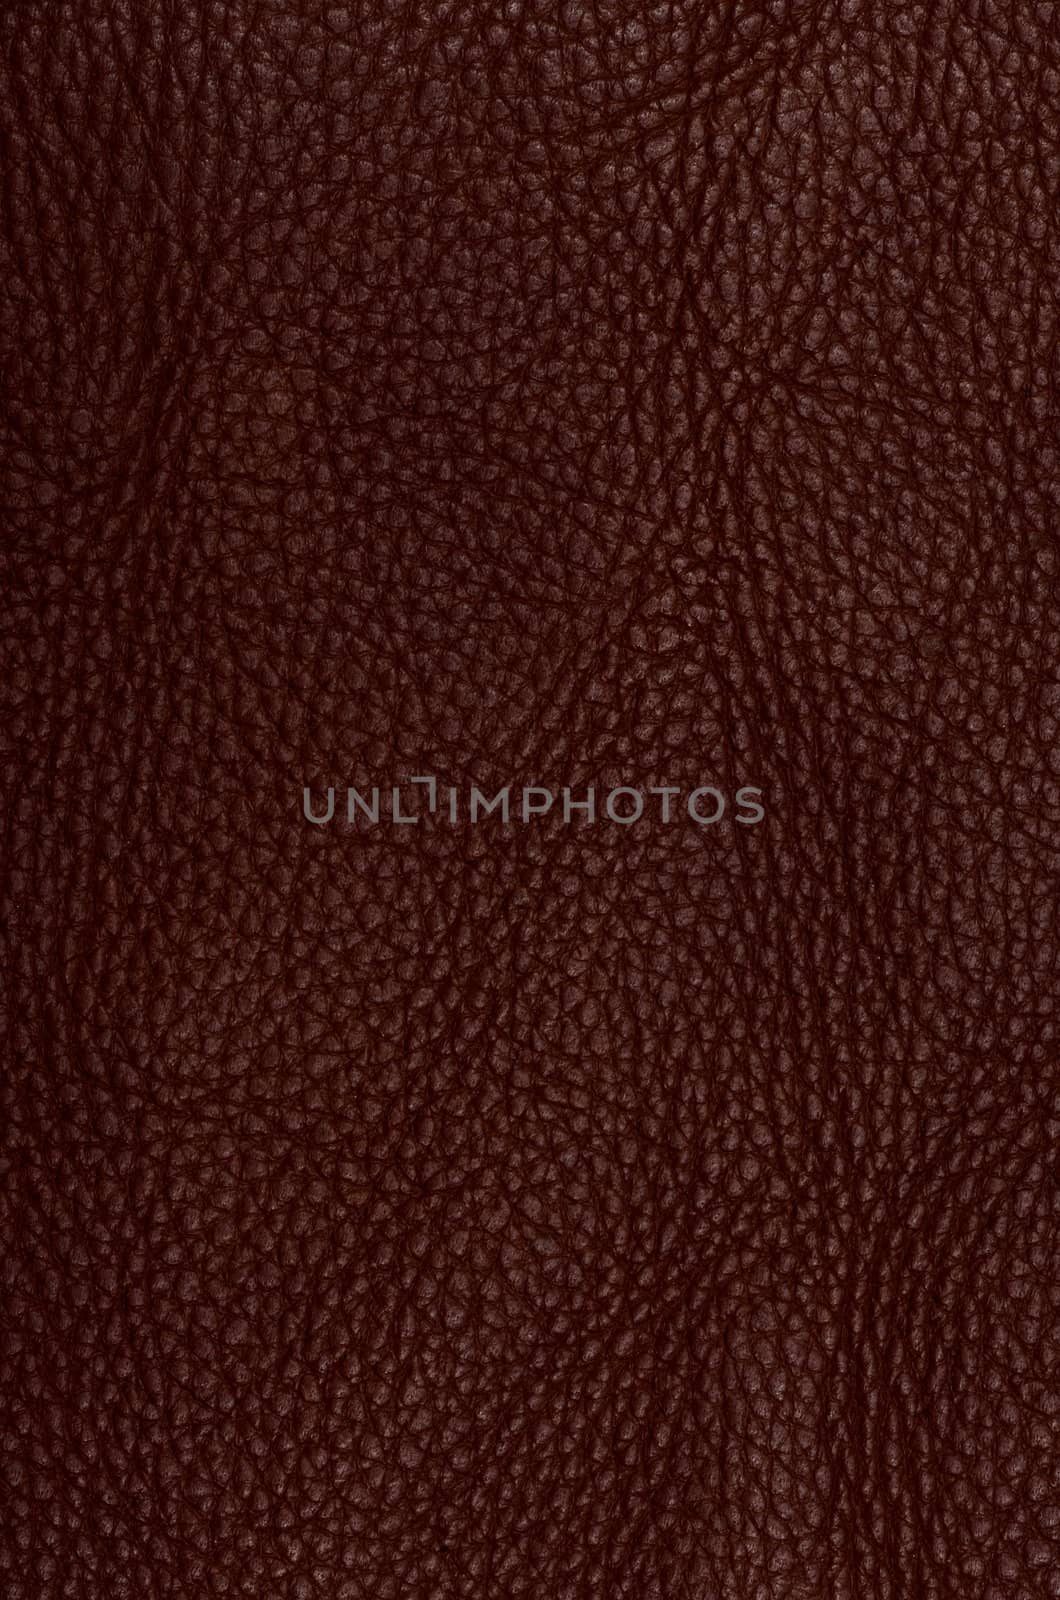 Brown leather texture closeup background by DNKSTUDIO